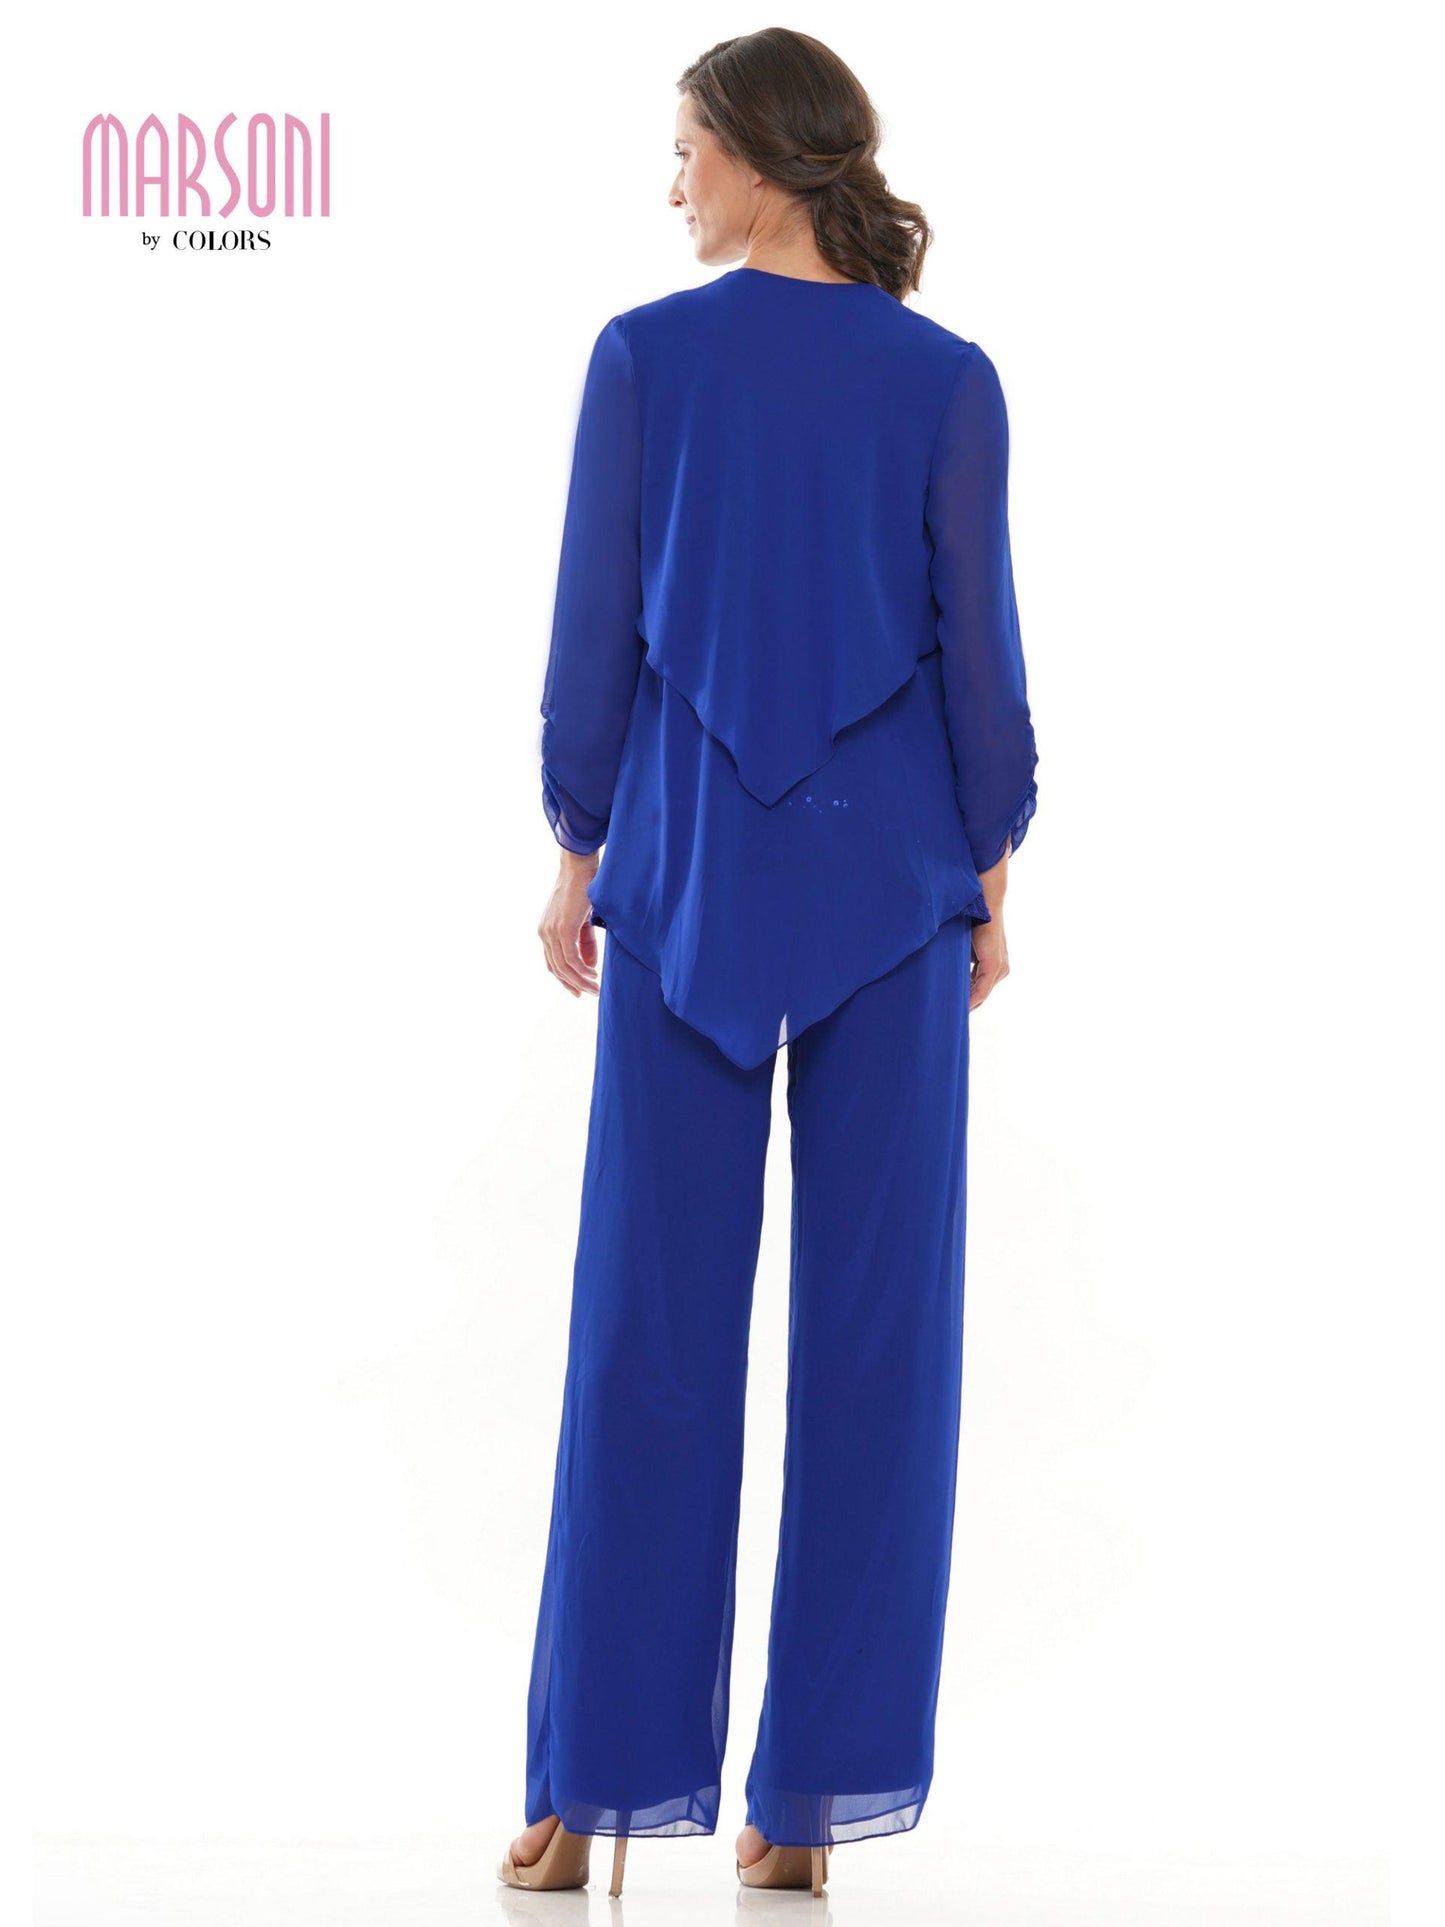 Marsoni Formal Mother of the Bride Pant Suit 303 - The Dress Outlet